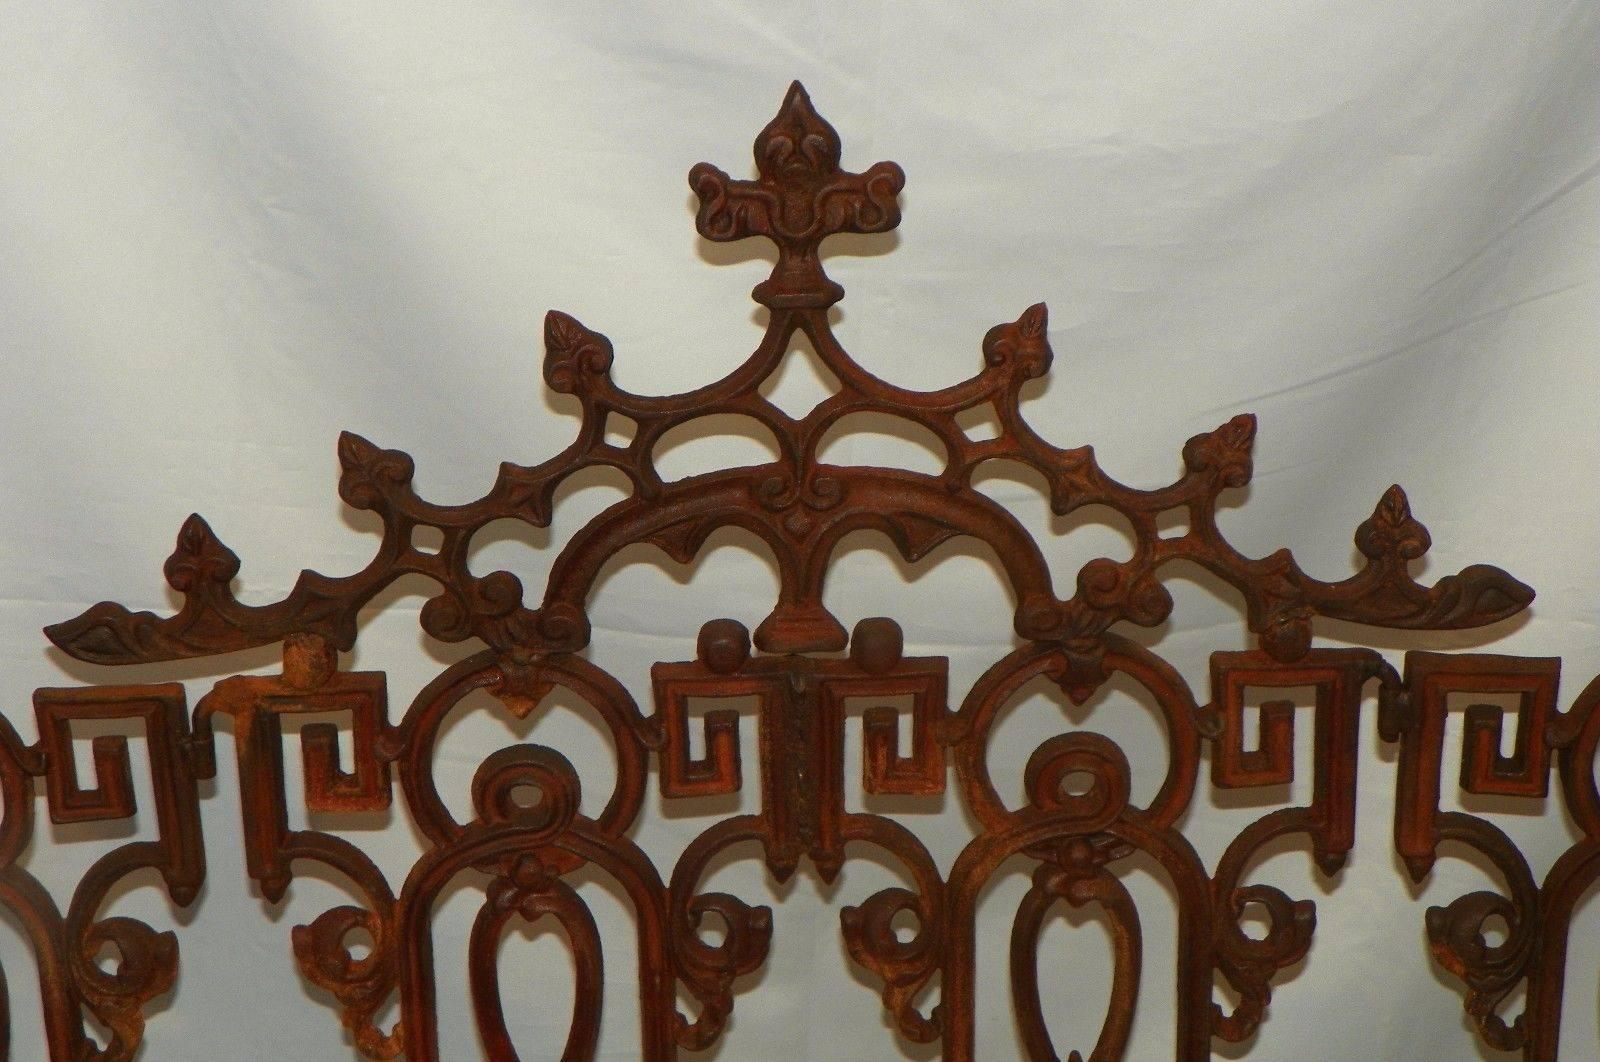 Large impressive fireplace screen. Very heavy iron. Gothic style, 19th century.

Measures: 47